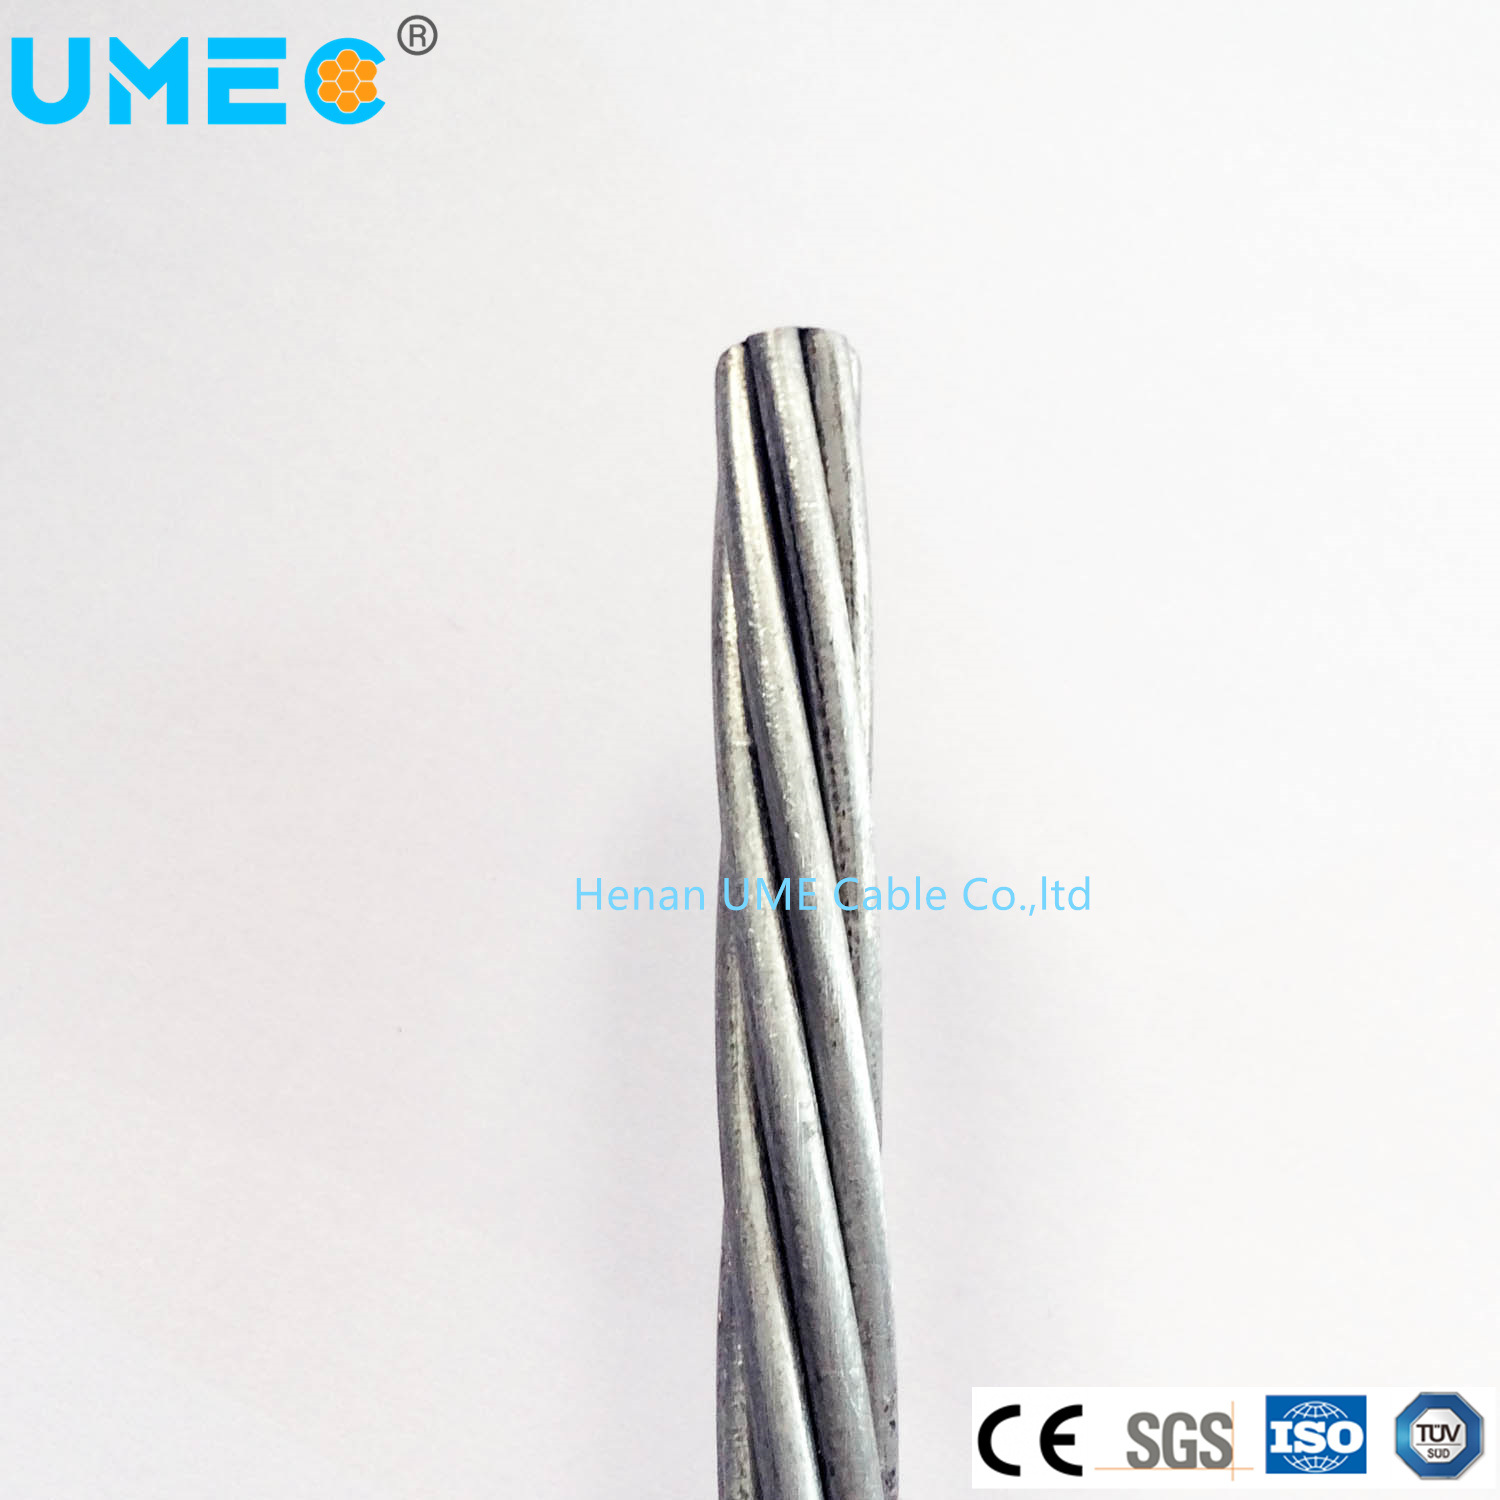 High Tensile Prestressing Steel Strand Price 1X7 3.3mm Galvanized Steel Strand for Catenary Wire